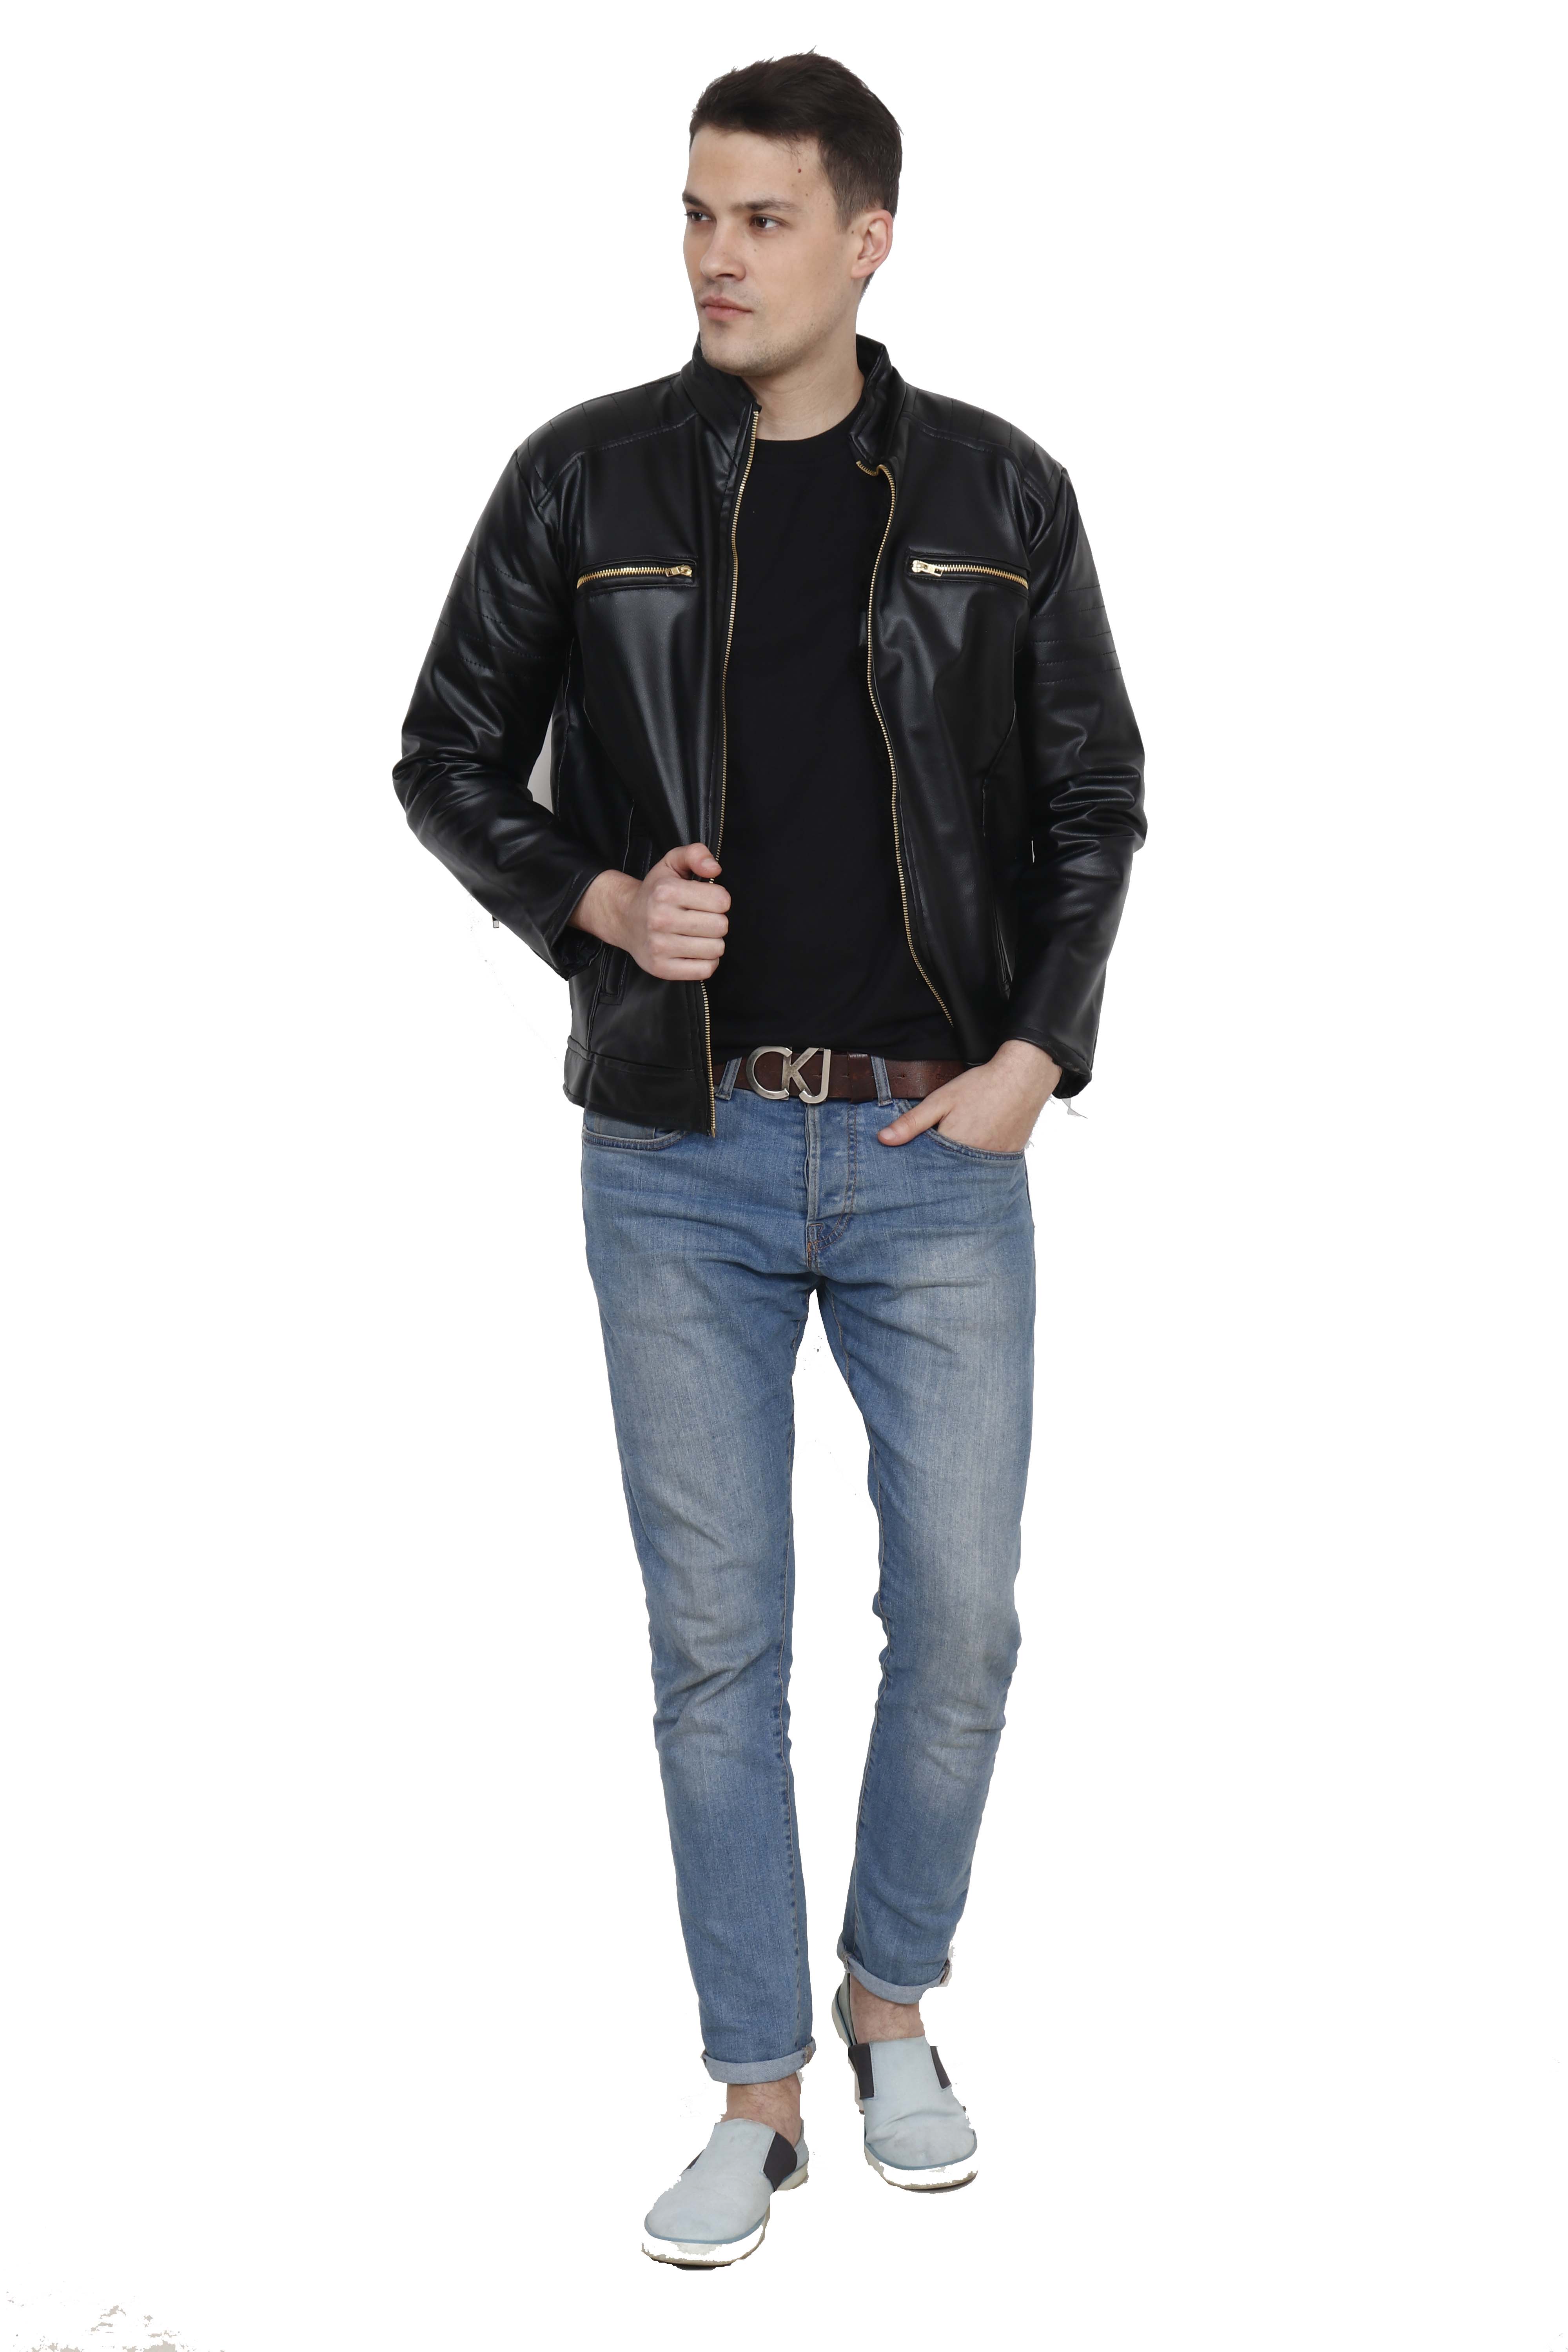 Buy Bona Black Leather Jackets For Mens Online @ ₹1499 from ShopClues